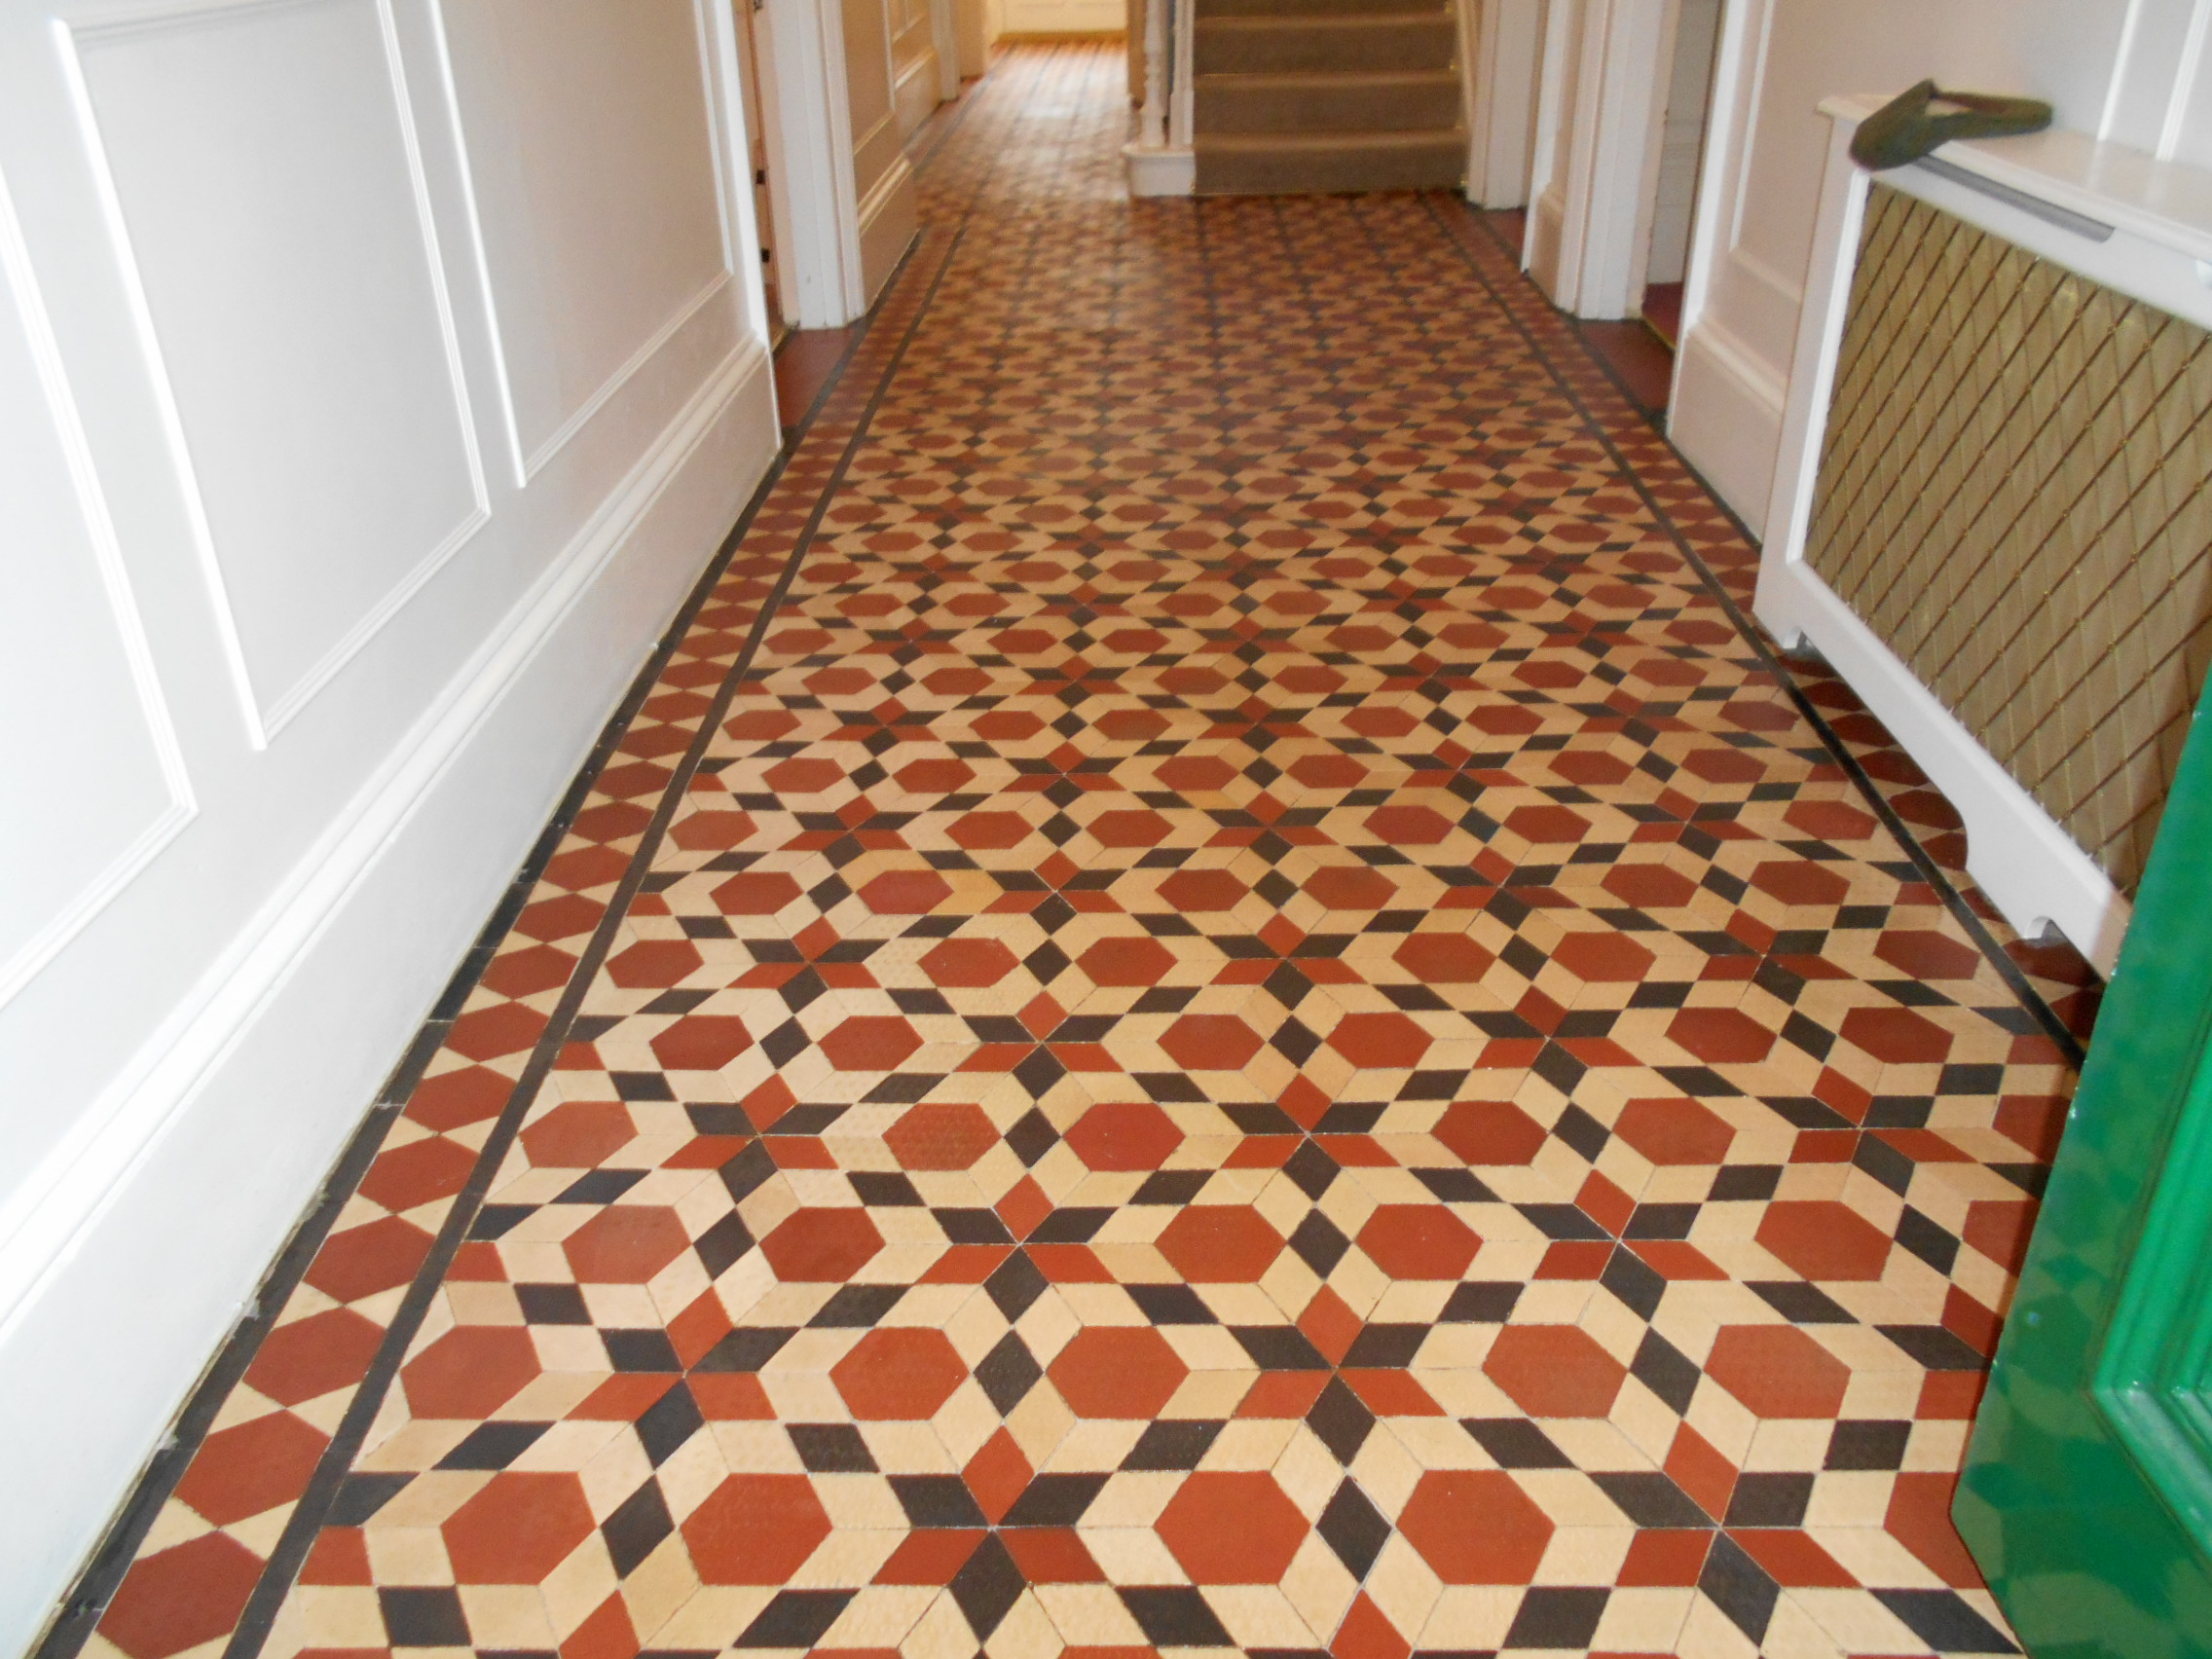 Unusual Victorian Hallway tiles with diamond shape tiles. Cleaned and restored in Hertfordshire